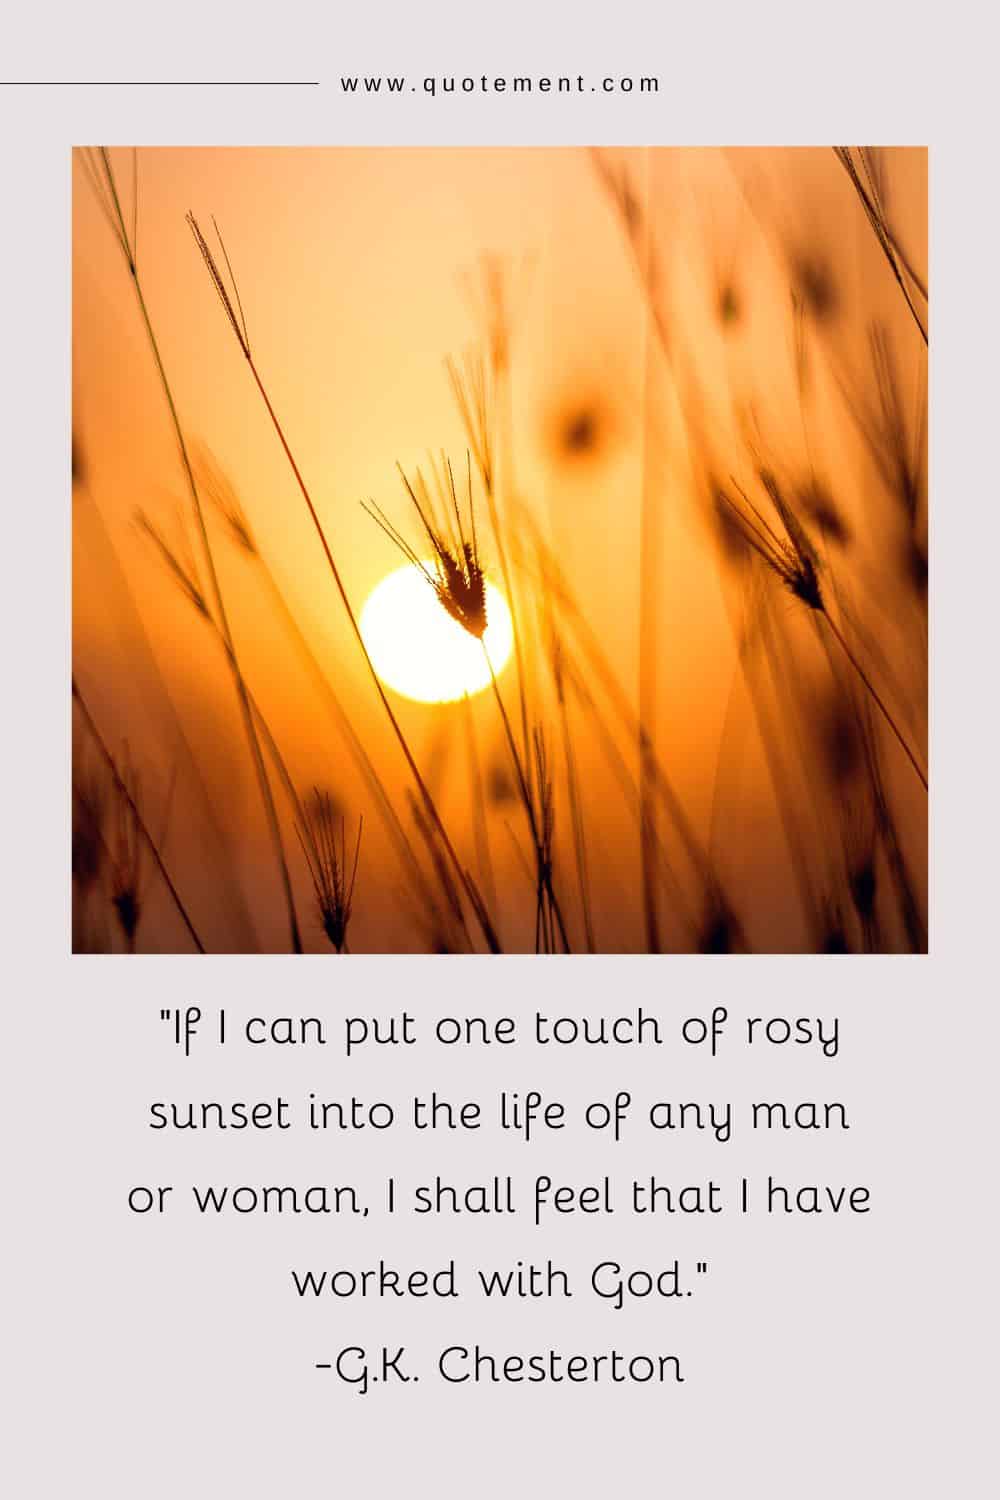 If I can put one touch of rosy sunset into the life of any man or woman, I shall feel that I have worked with God.